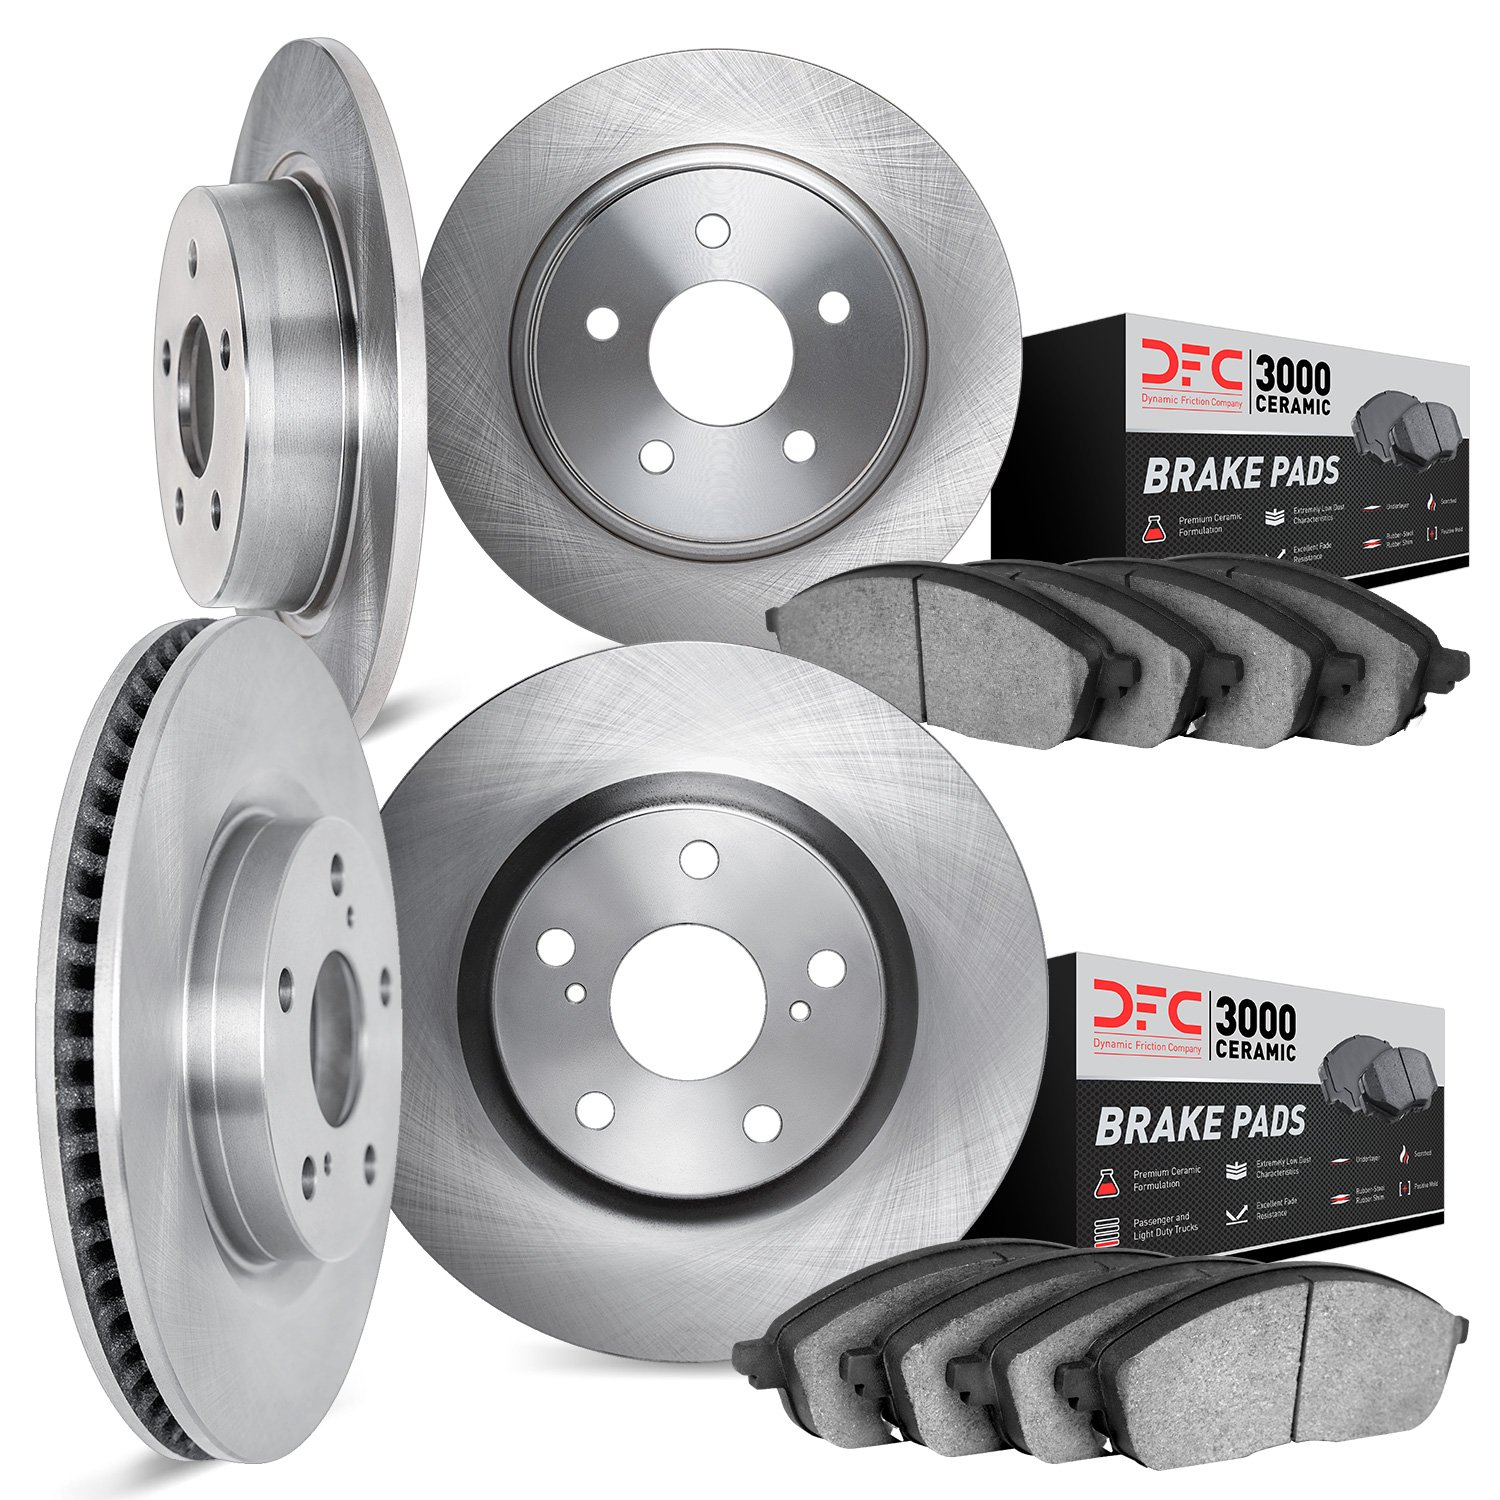 6304-76060 Brake Rotors with 3000-Series Ceramic Brake Pads Kit, 2002-2003 Lexus/Toyota/Scion, Position: Front and Rear